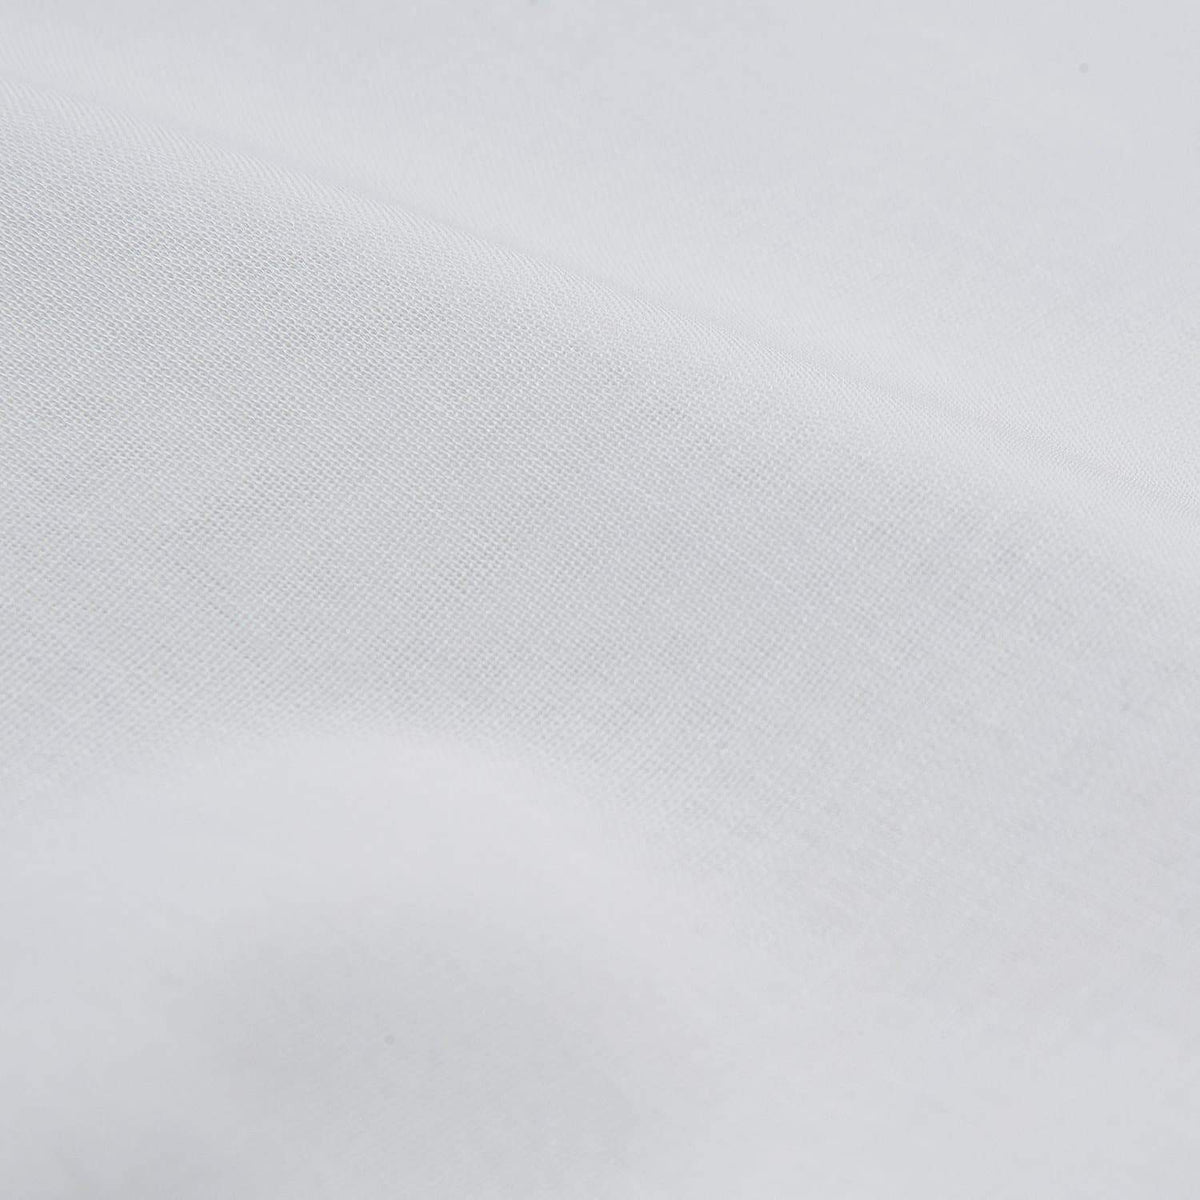 White Voile Dress Shirt - Die Another Day Edition - By Turnbull &amp; Asser CLOTHING Turnbull &amp; Asser 